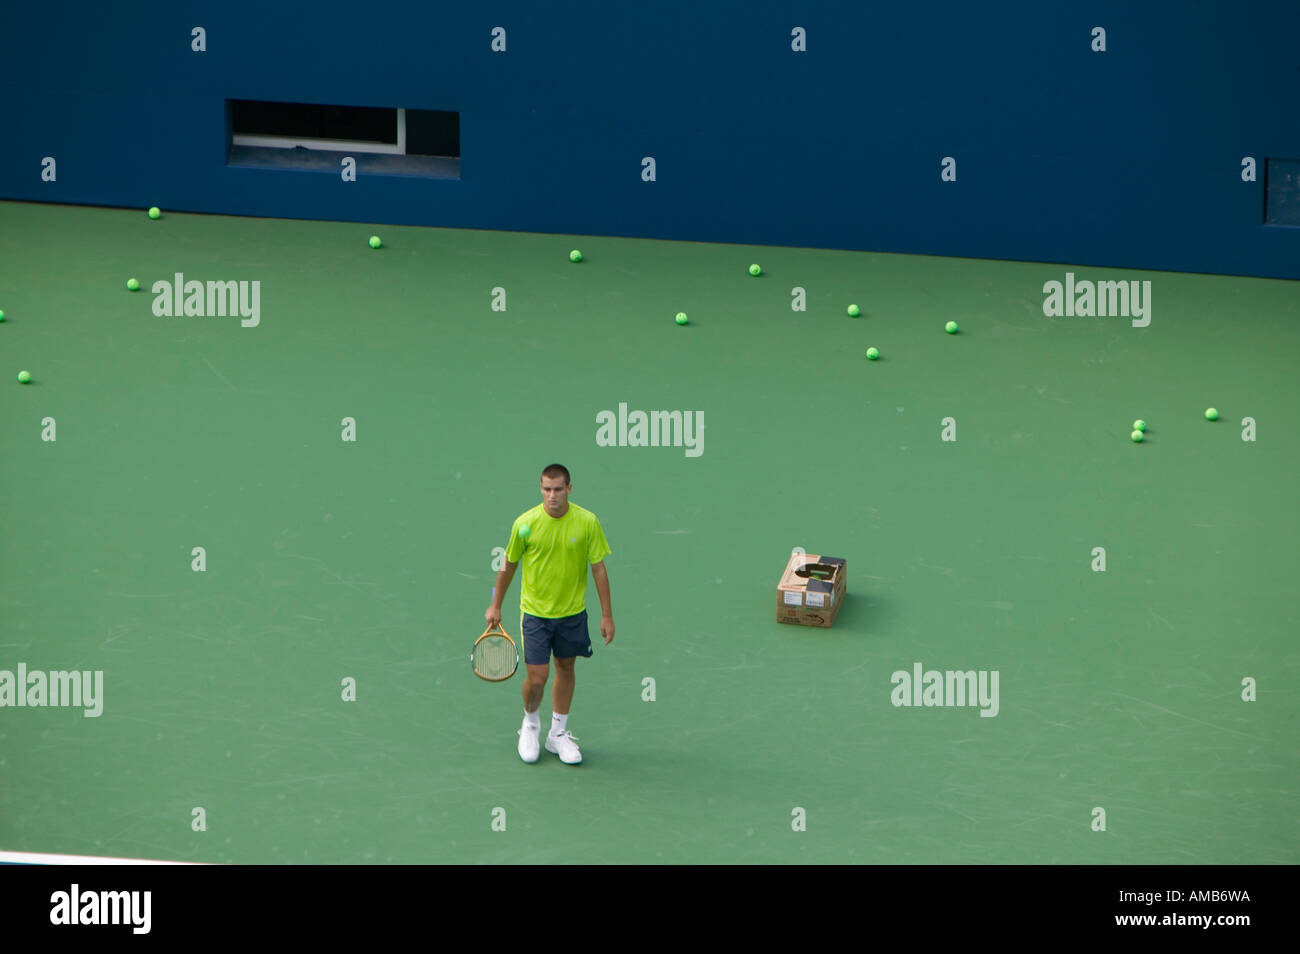 Yellow tennis balls accumulate behind a single tennisman during a practice game Flushing Meados New York 2005 Stock Photo